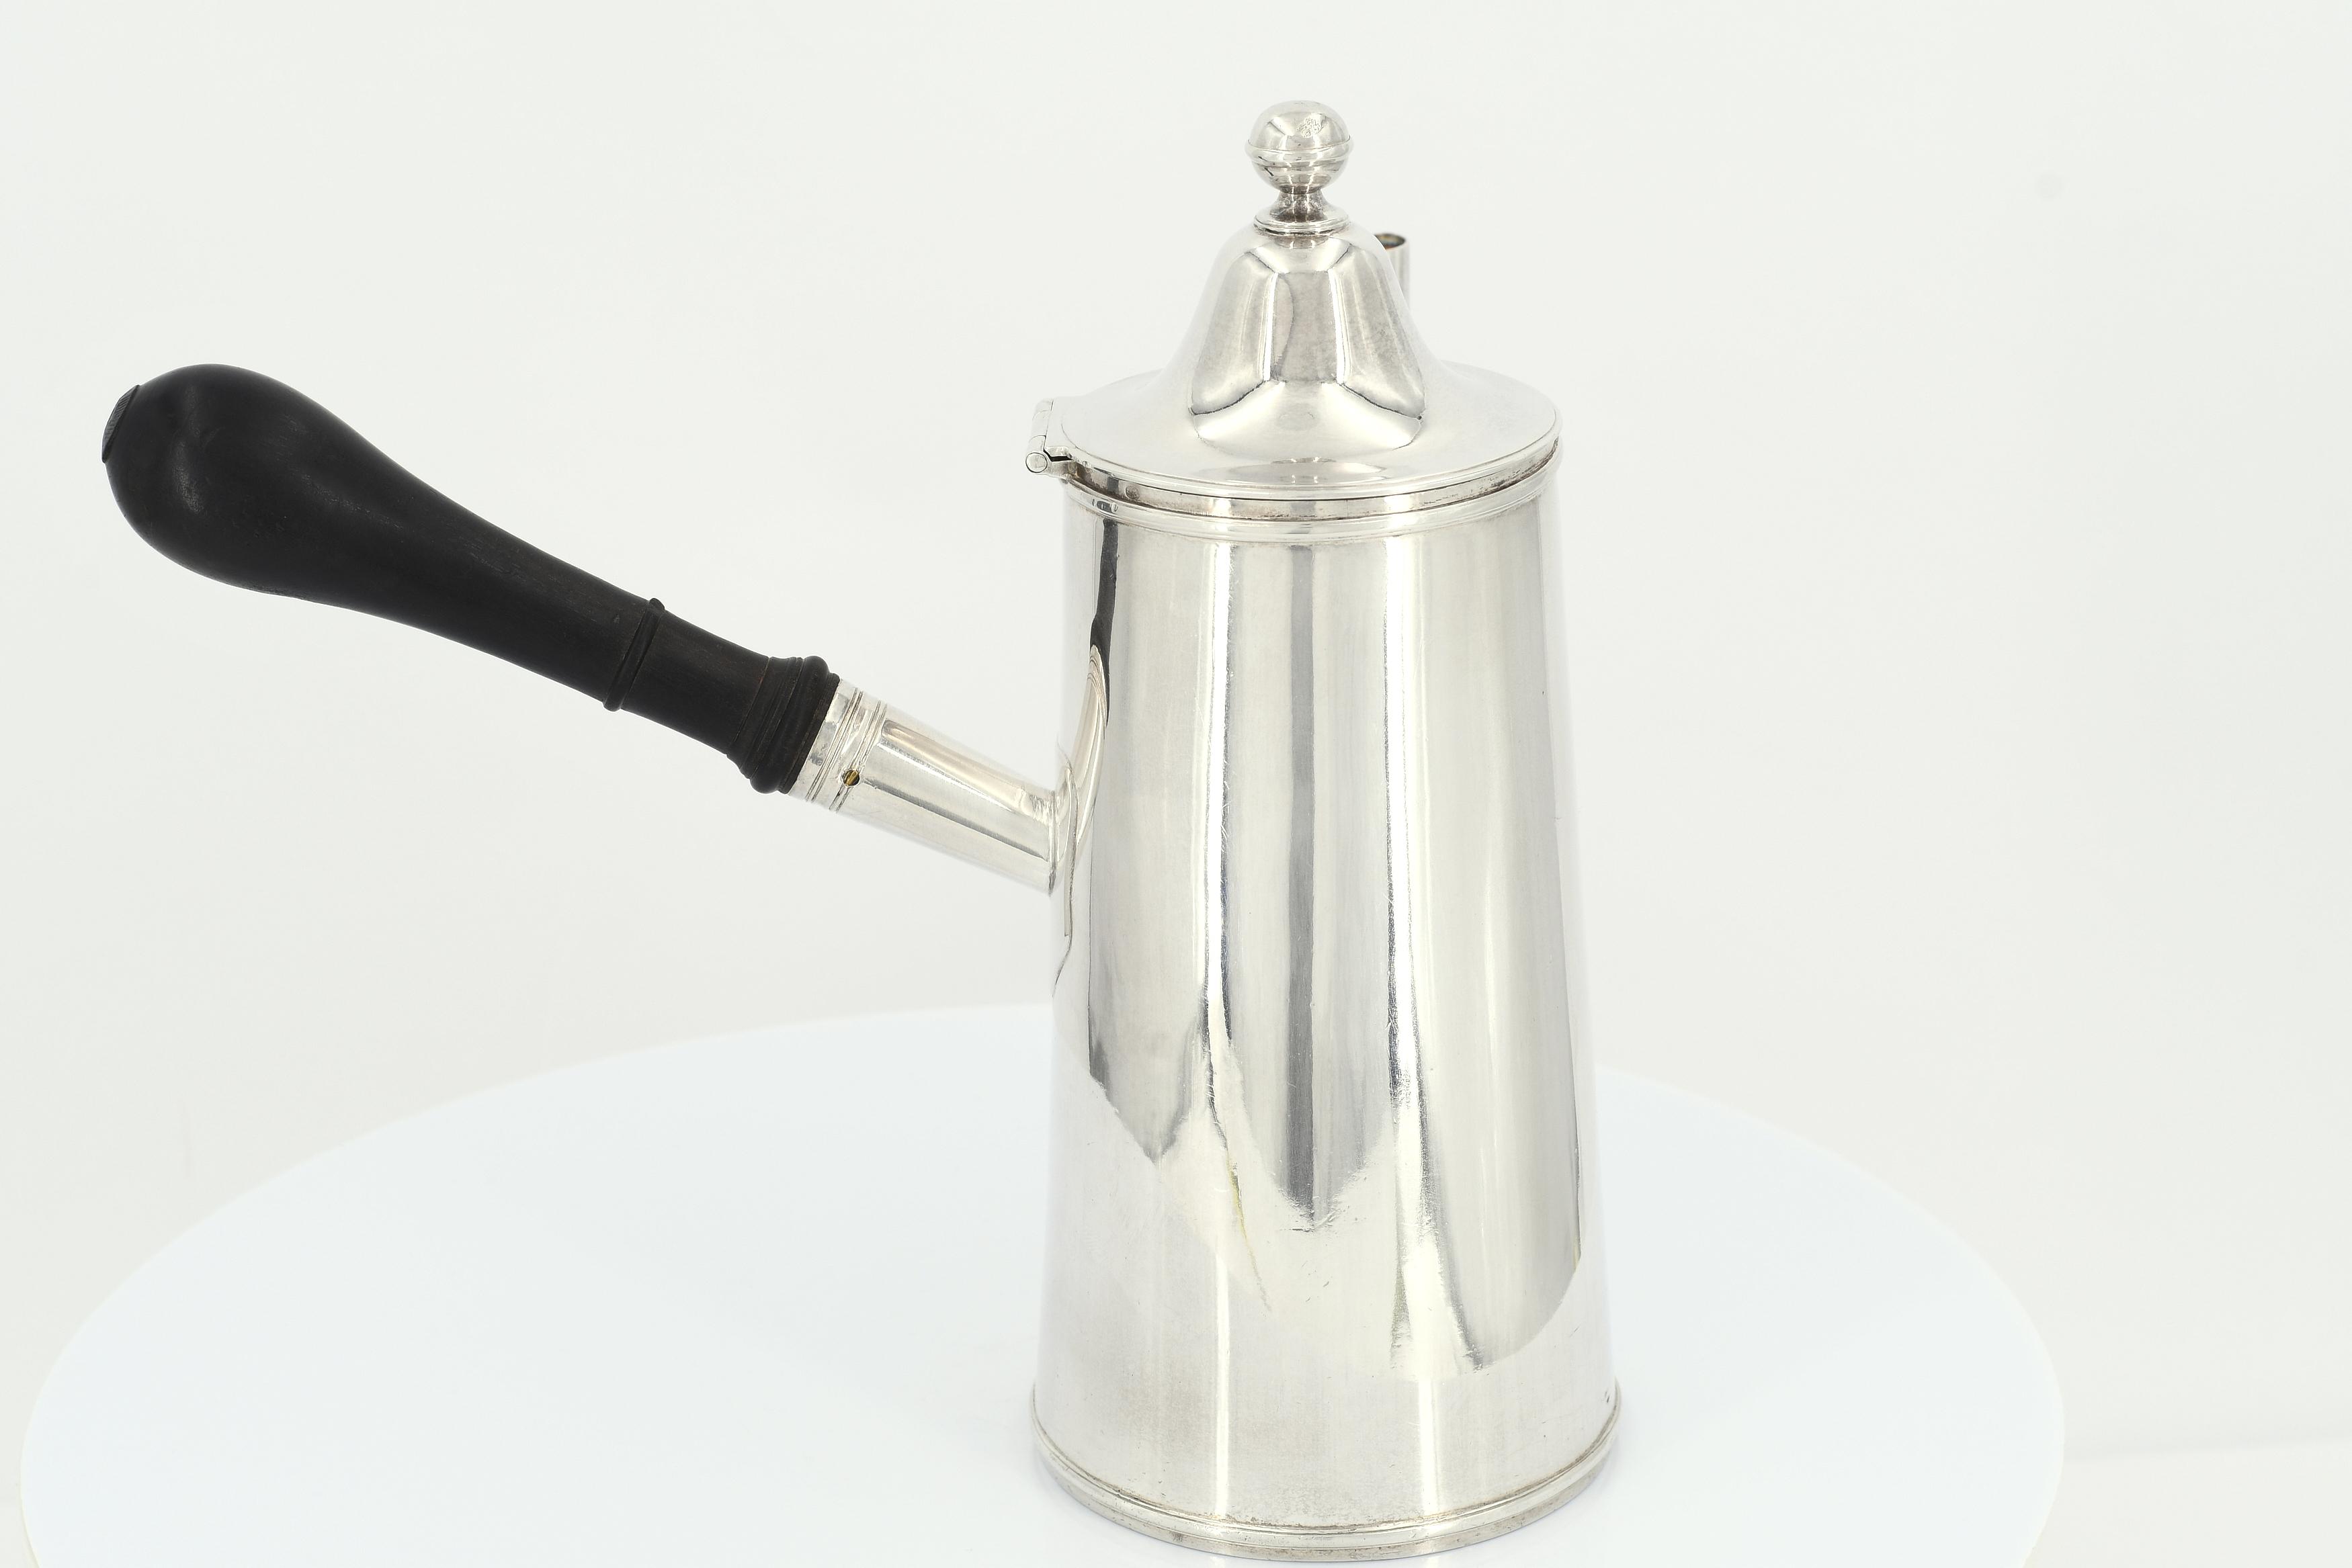 Silver coffee pot with side handle and sleek body - Image 4 of 7